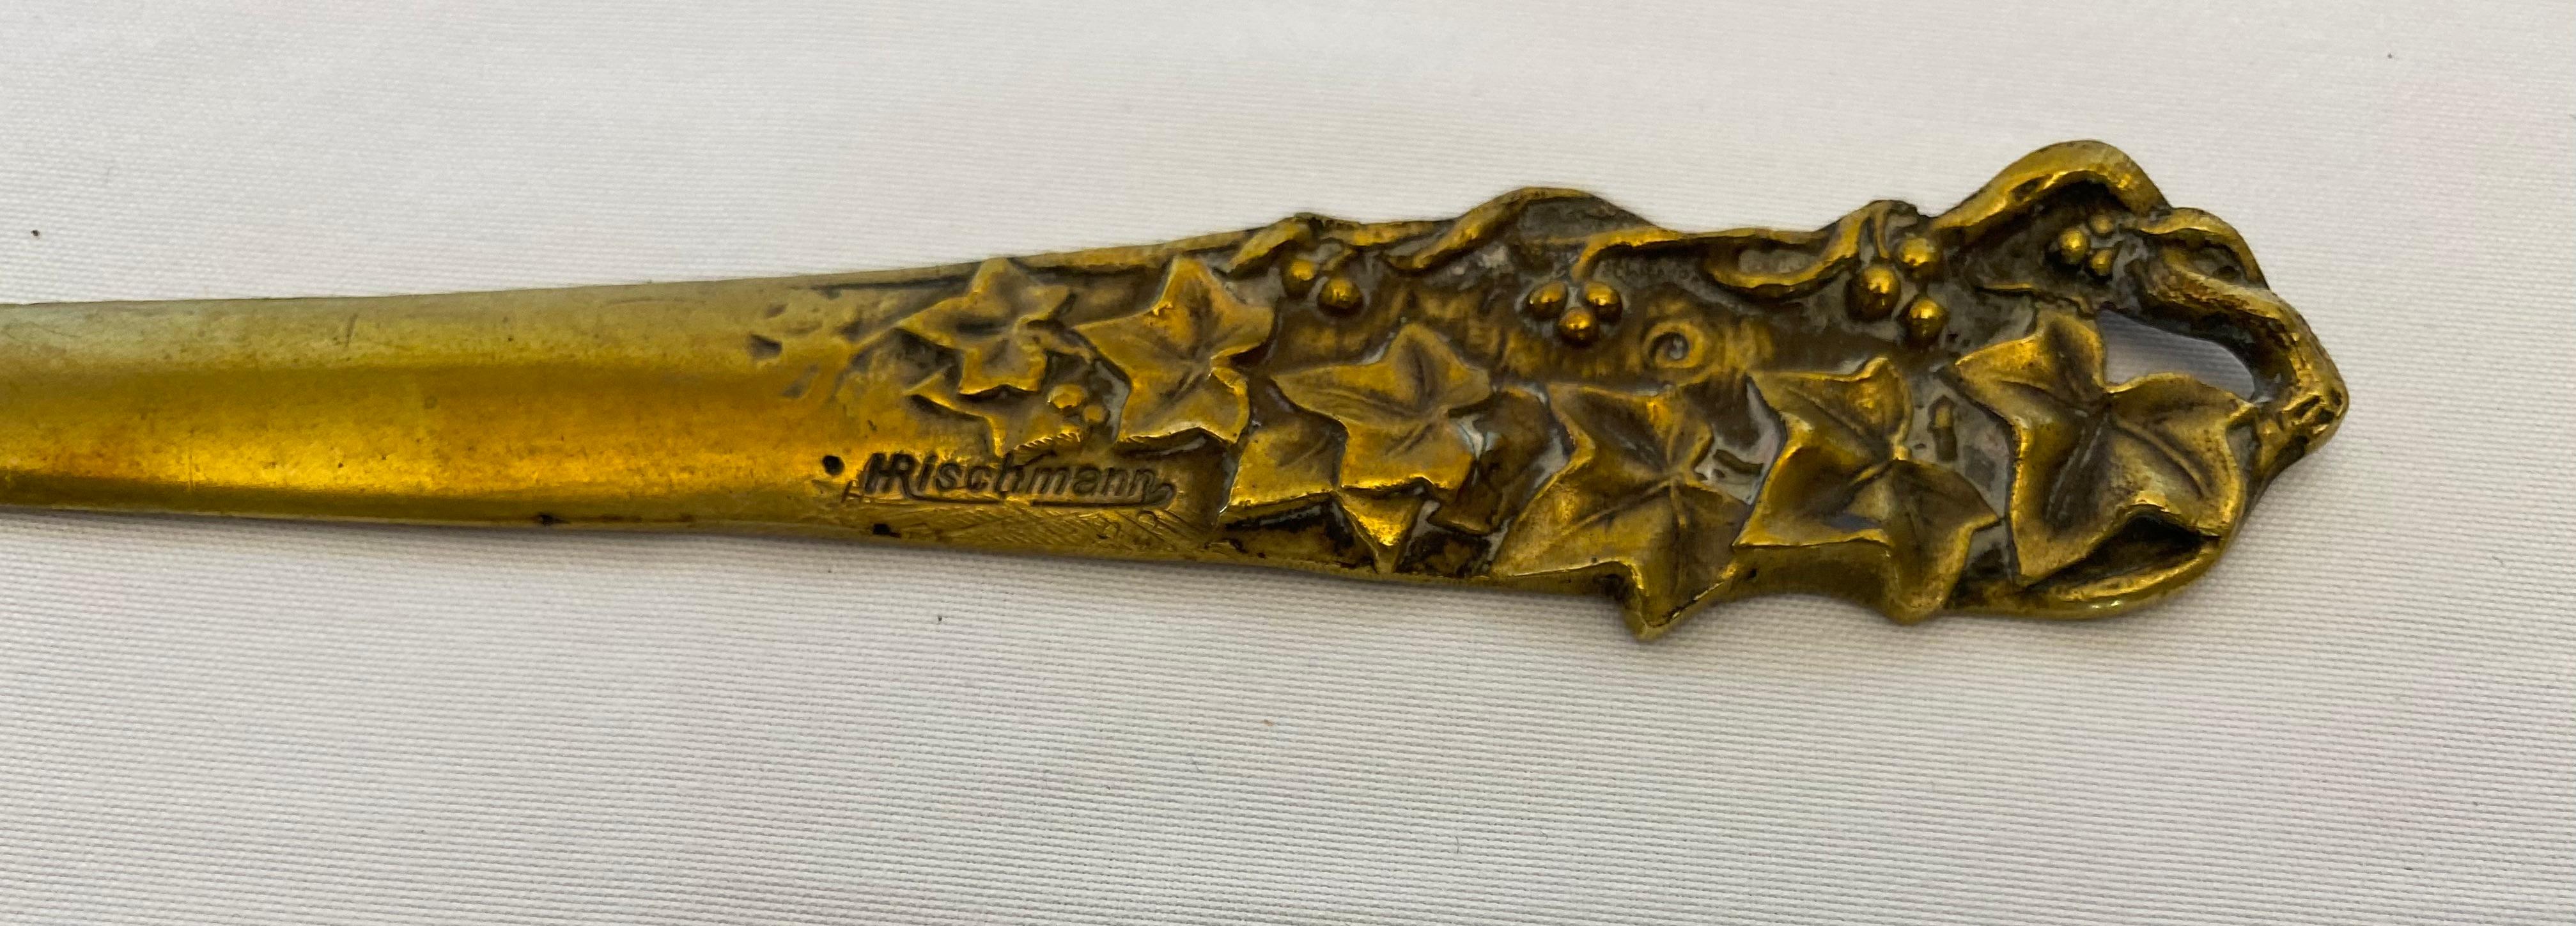 A beautiful bronze letter opener in the Art Nouveau style from France. 
Representing fruits: apples, plums or cherries. 
Designer/Artist: Ernst Rischmann 

Very good antique condition with age appropriate signs of wear.
Wonderful patina.